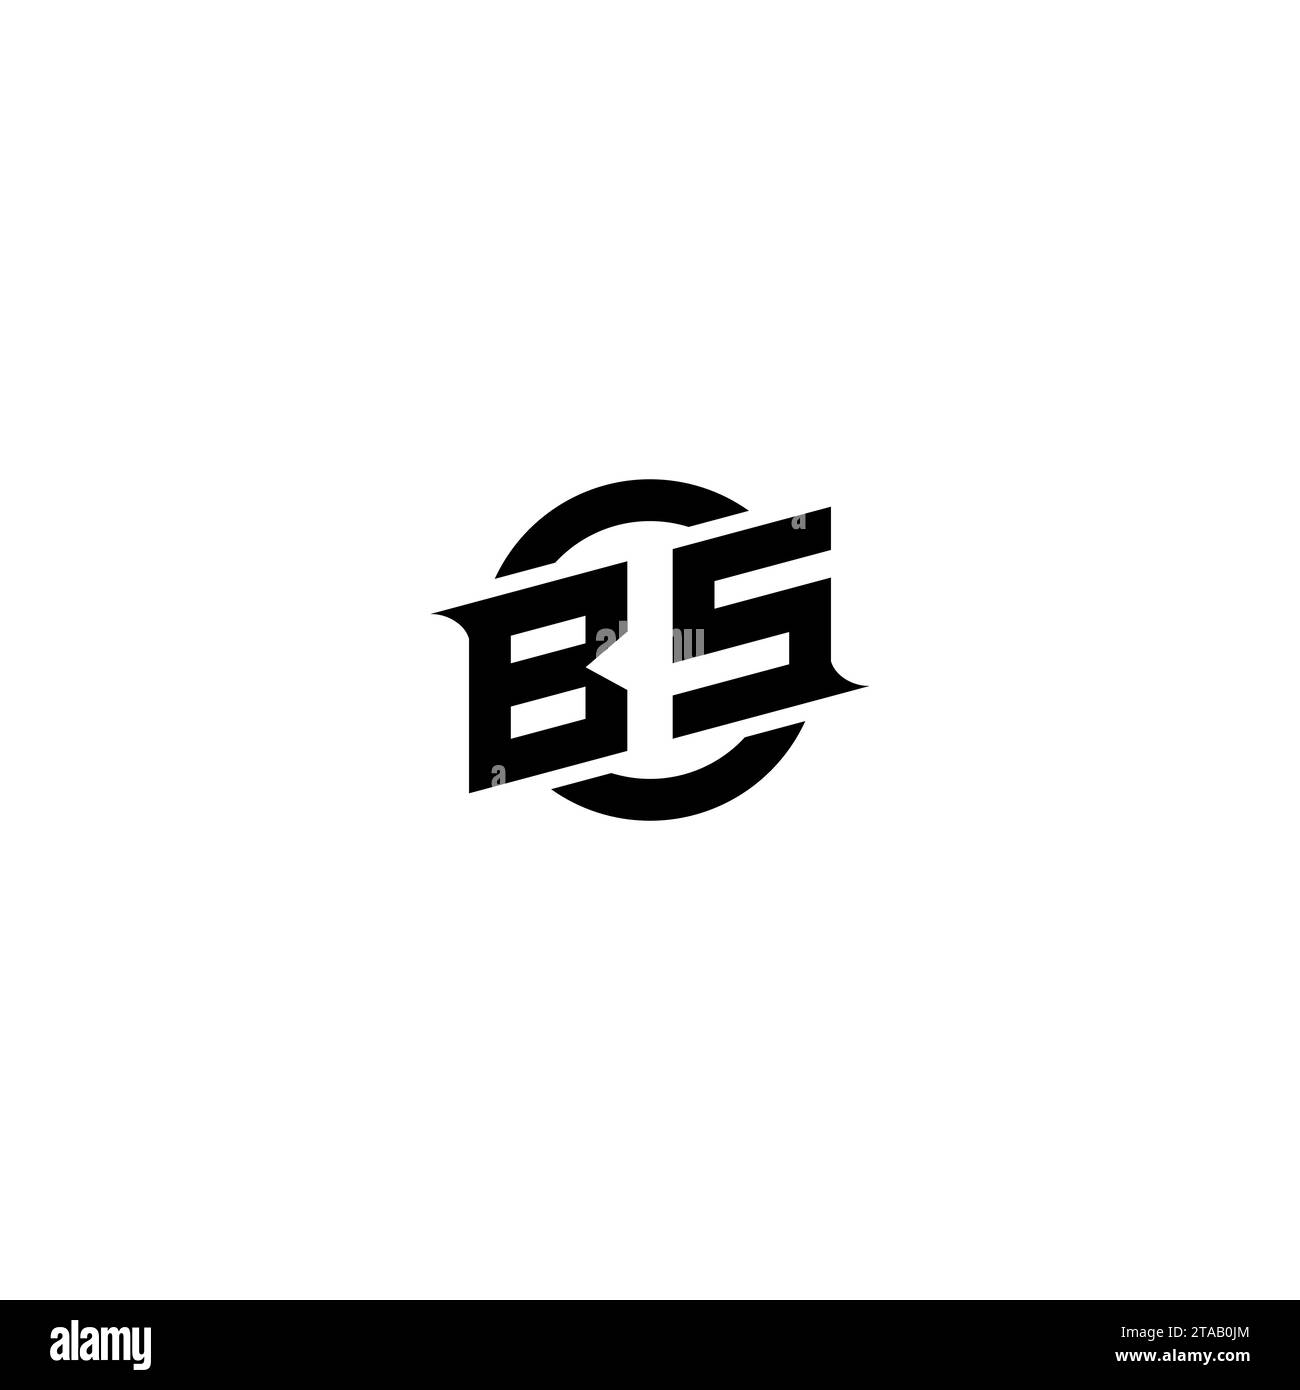 BS initial game logo, banner design for your e-sports or streaming team Stock Vector